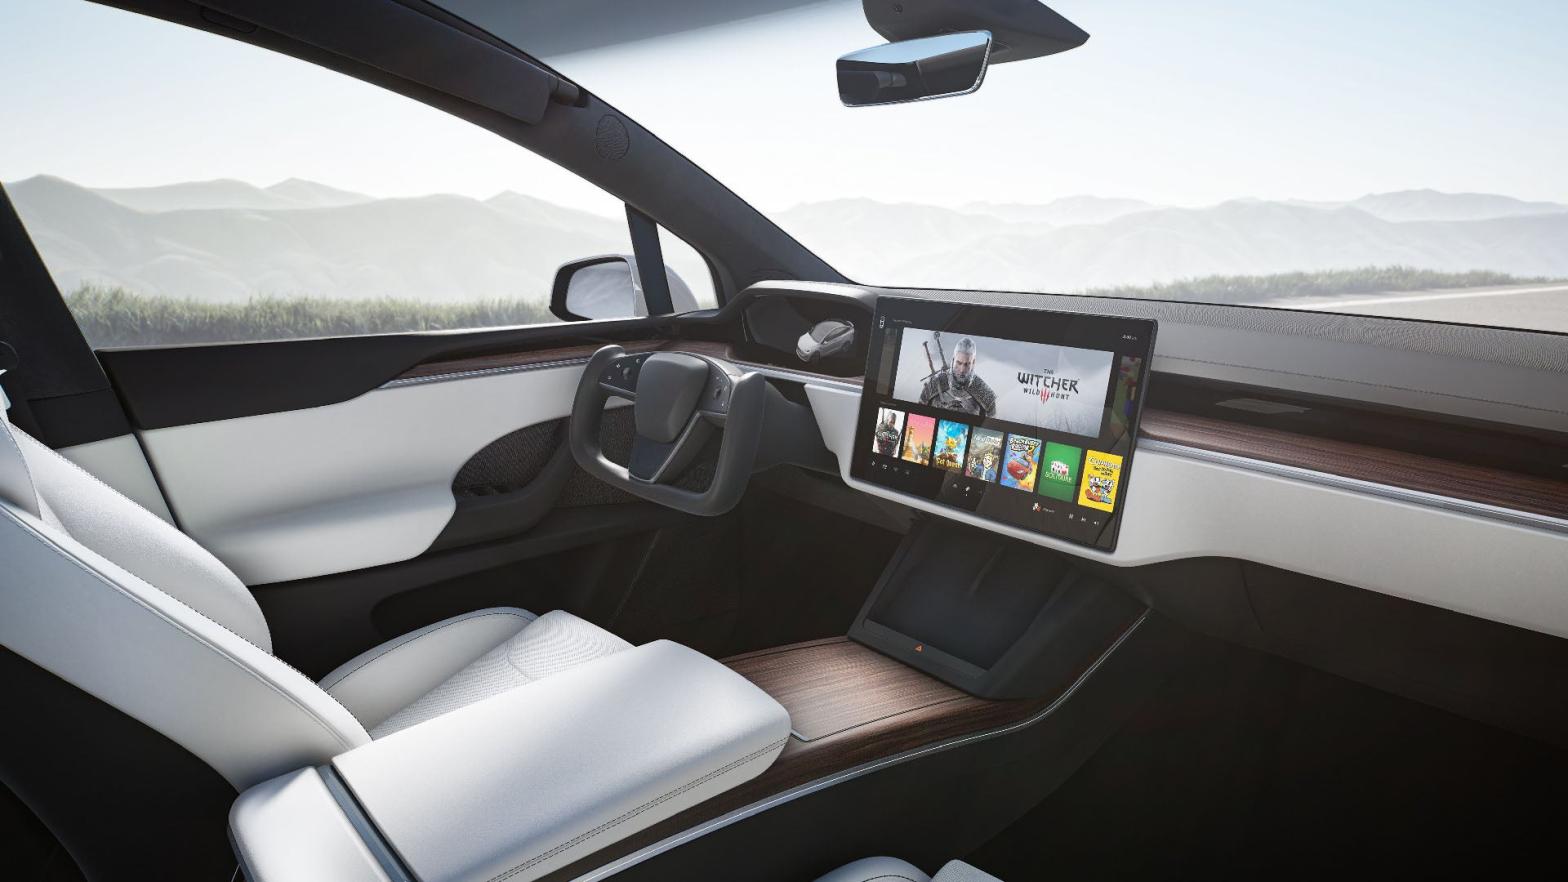 The entertainment system of a Tesla Model X showing an entirely different CDPR game. (Photo: Tesla)